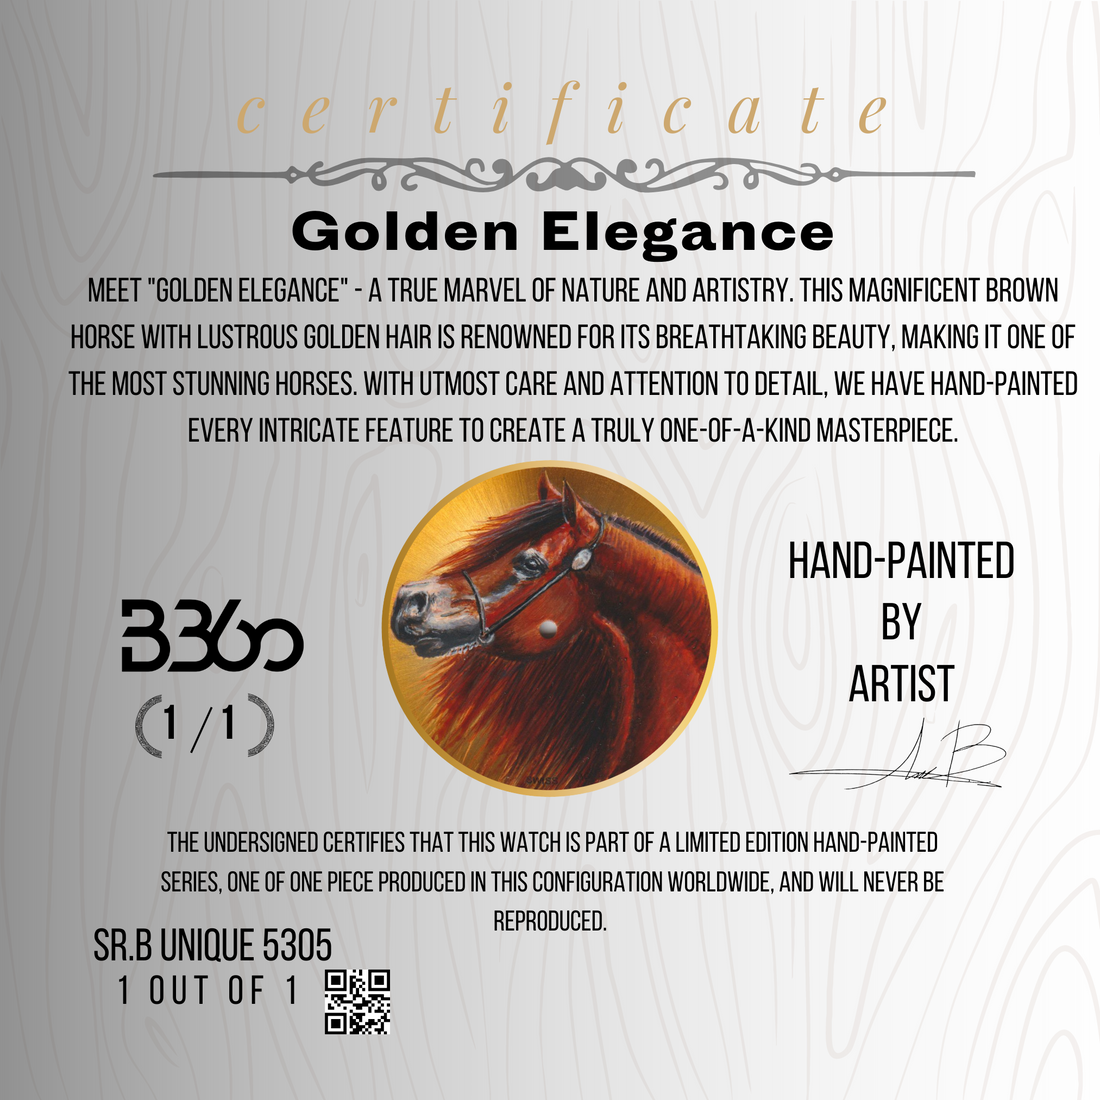 Discover the allure of 'Golden Elegance' - a B360 Watch featuring a hand-painted depiction of a breathtaking brown horse with lustrous golden hair on a yellow background. This unique timepiece captures the essence of nature's beauty and showcases unparalleled artistry, making it a true one-of-a-kind masterpiece